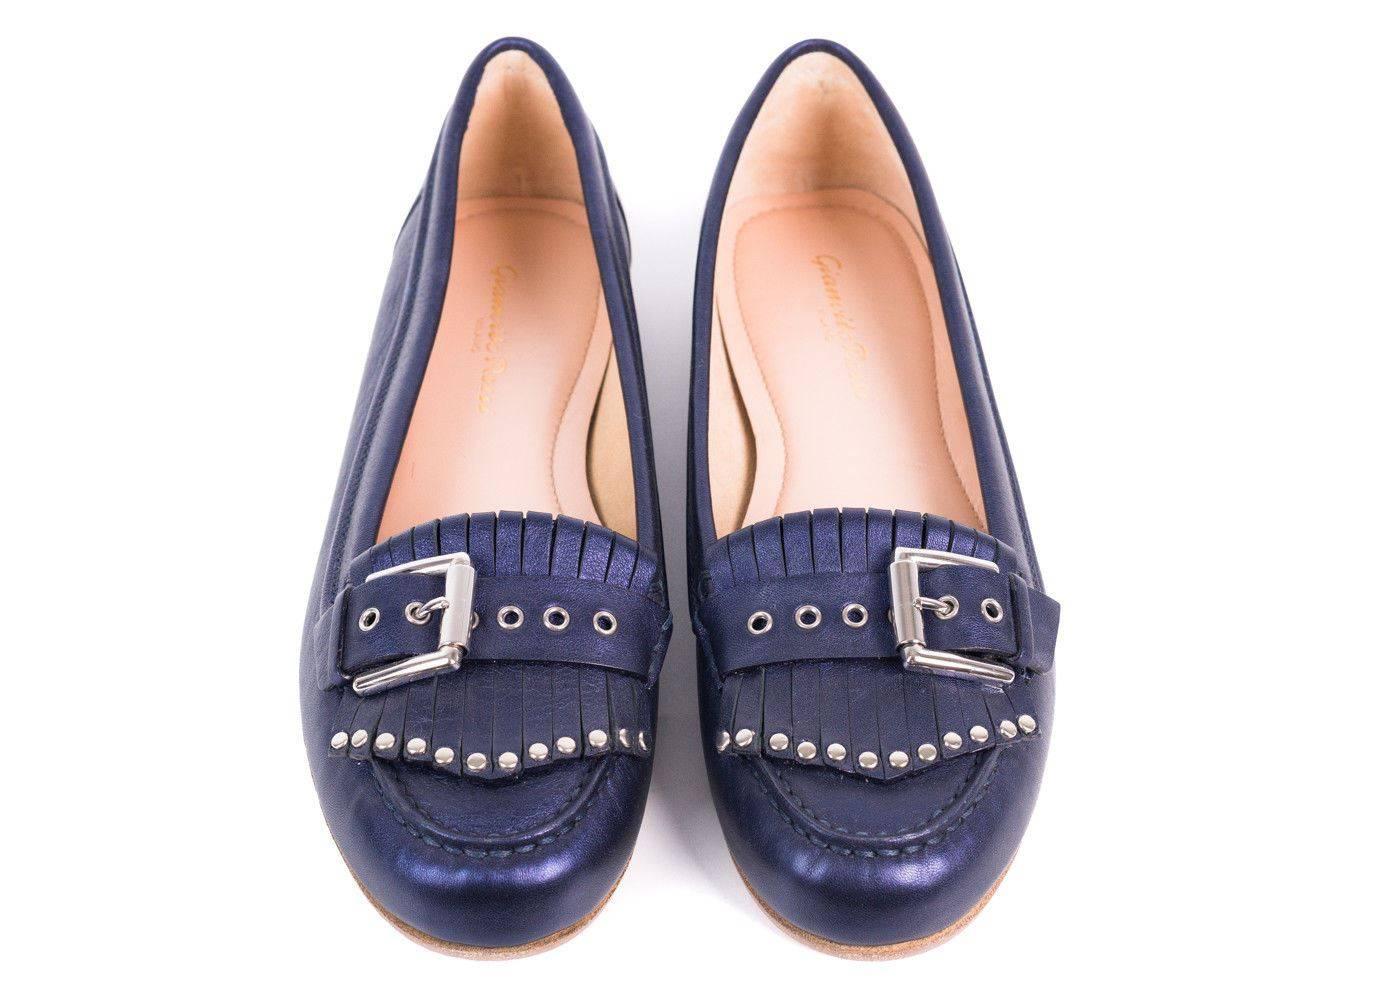 Brand New Gianvito Rossi Buckle Loafers
Original Box Included
Retails In-Store & Online for $675
Size IT37 / US7

Gianvito Rossi continues to bridge Italian glamour and high-end craftsmanship with a modern aesthetic for your everyday wear. The